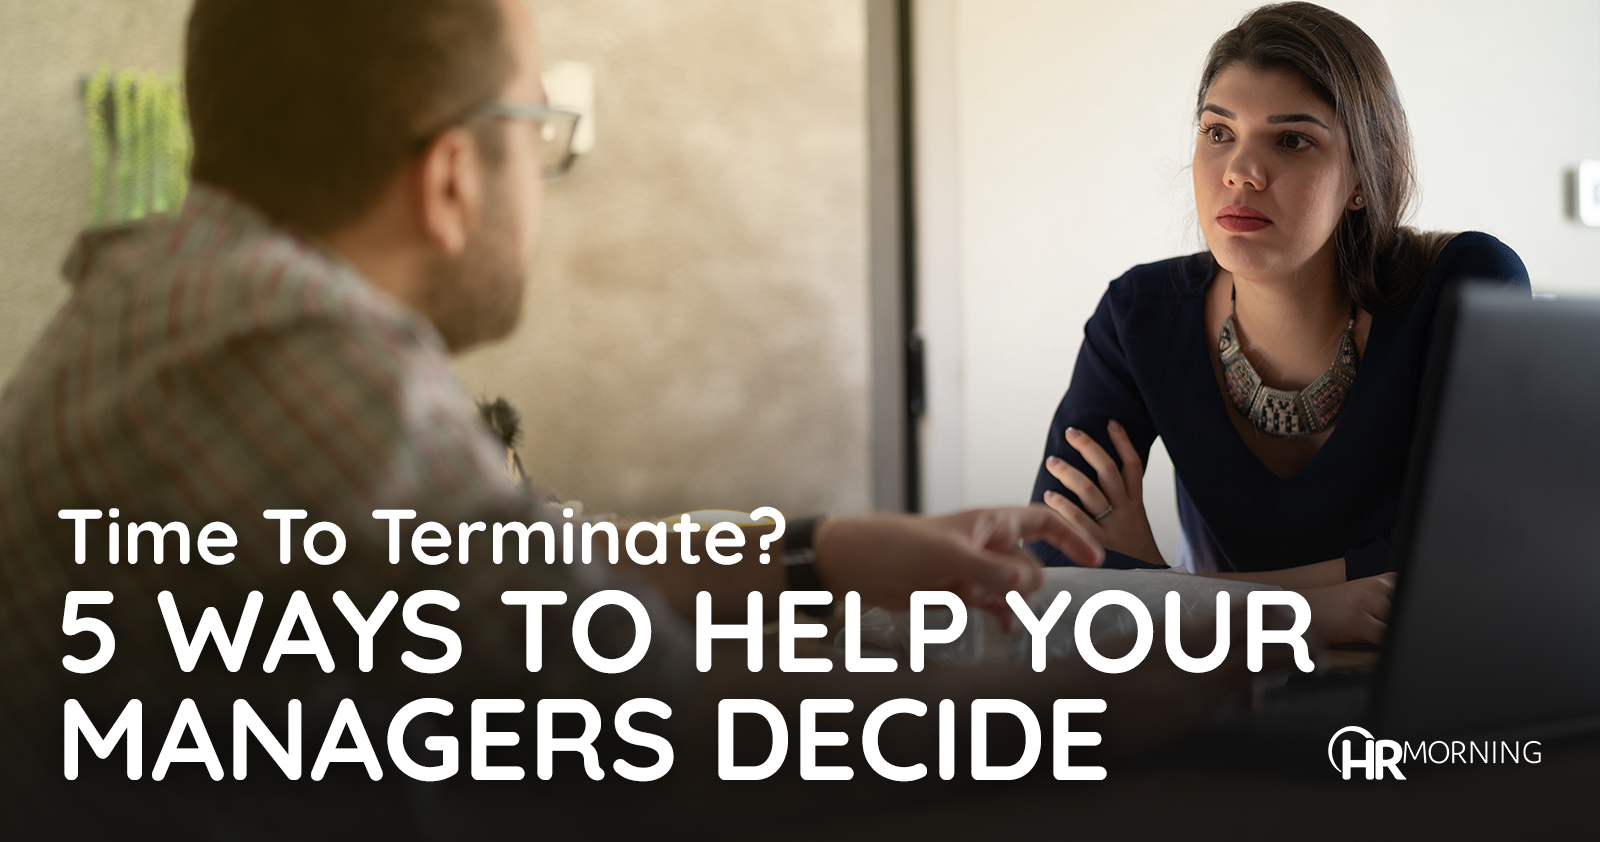 time to terminate? 5 ways to help your managers decide